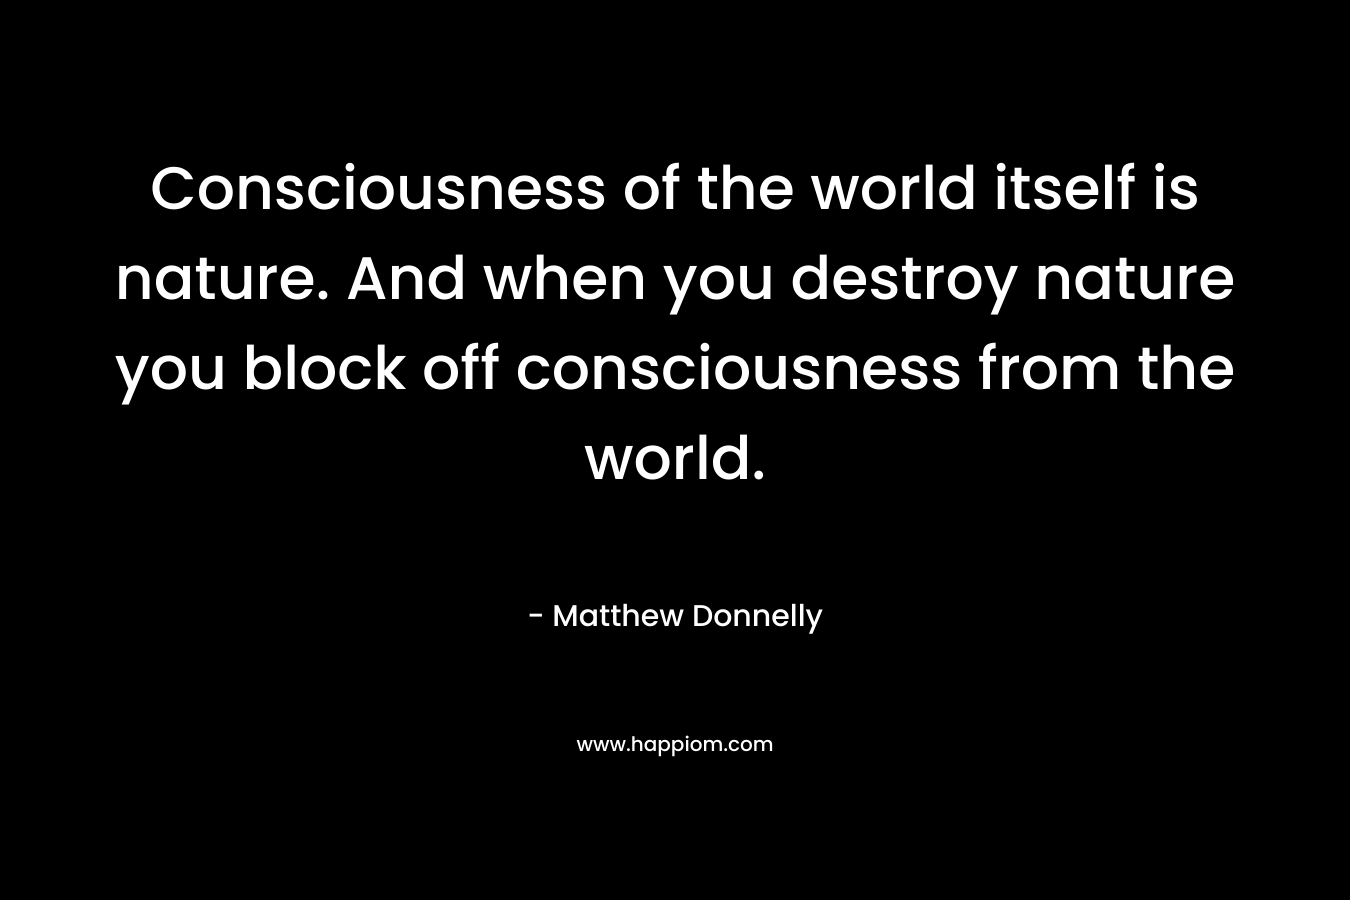 Consciousness of the world itself is nature. And when you destroy nature you block off consciousness from the world.